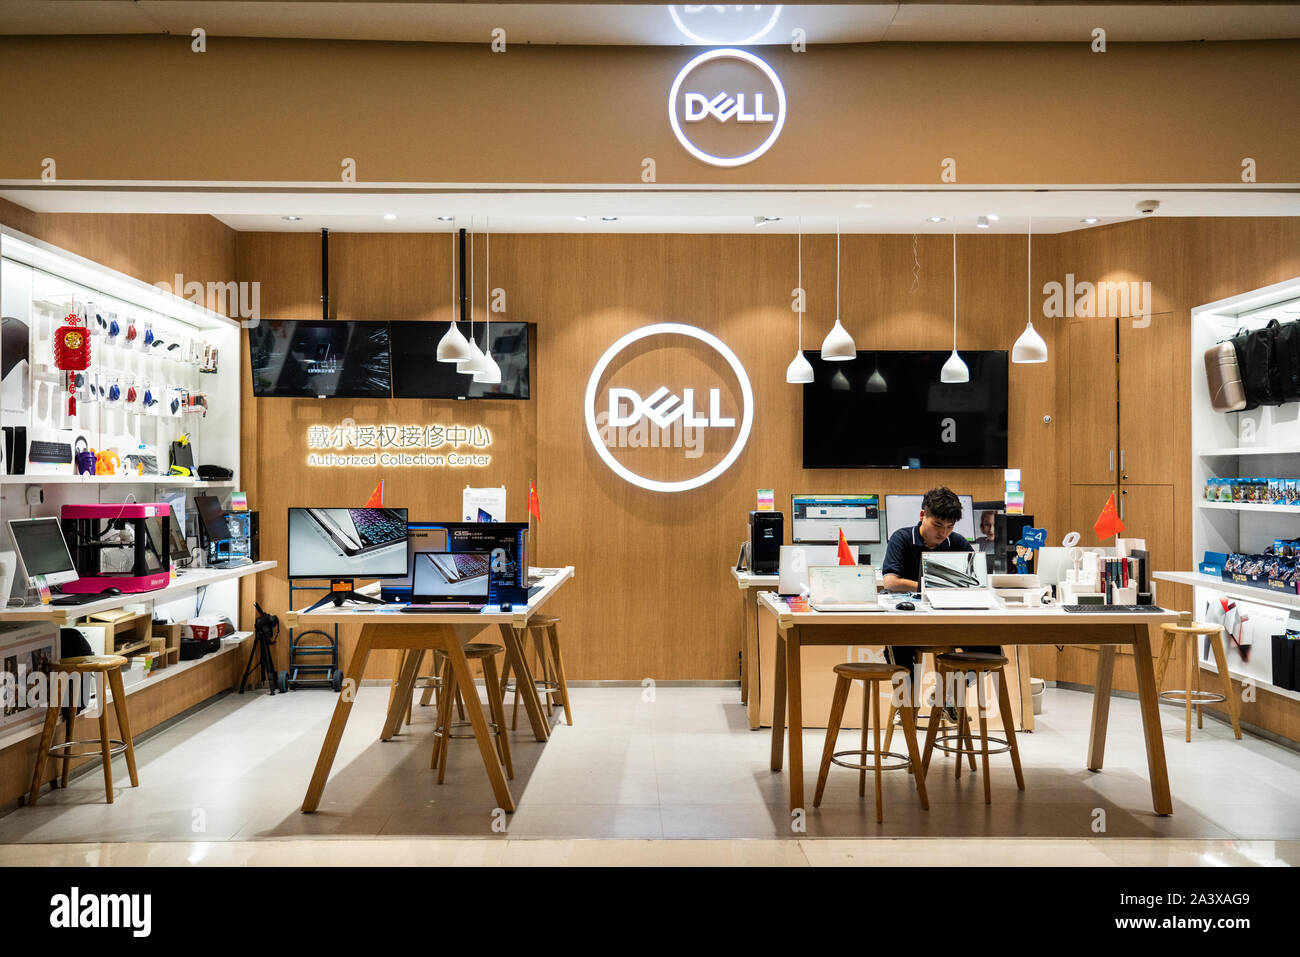 American multinational computer technology company, Dell store and logo  seen in Shenzhen Stock Photo - Alamy